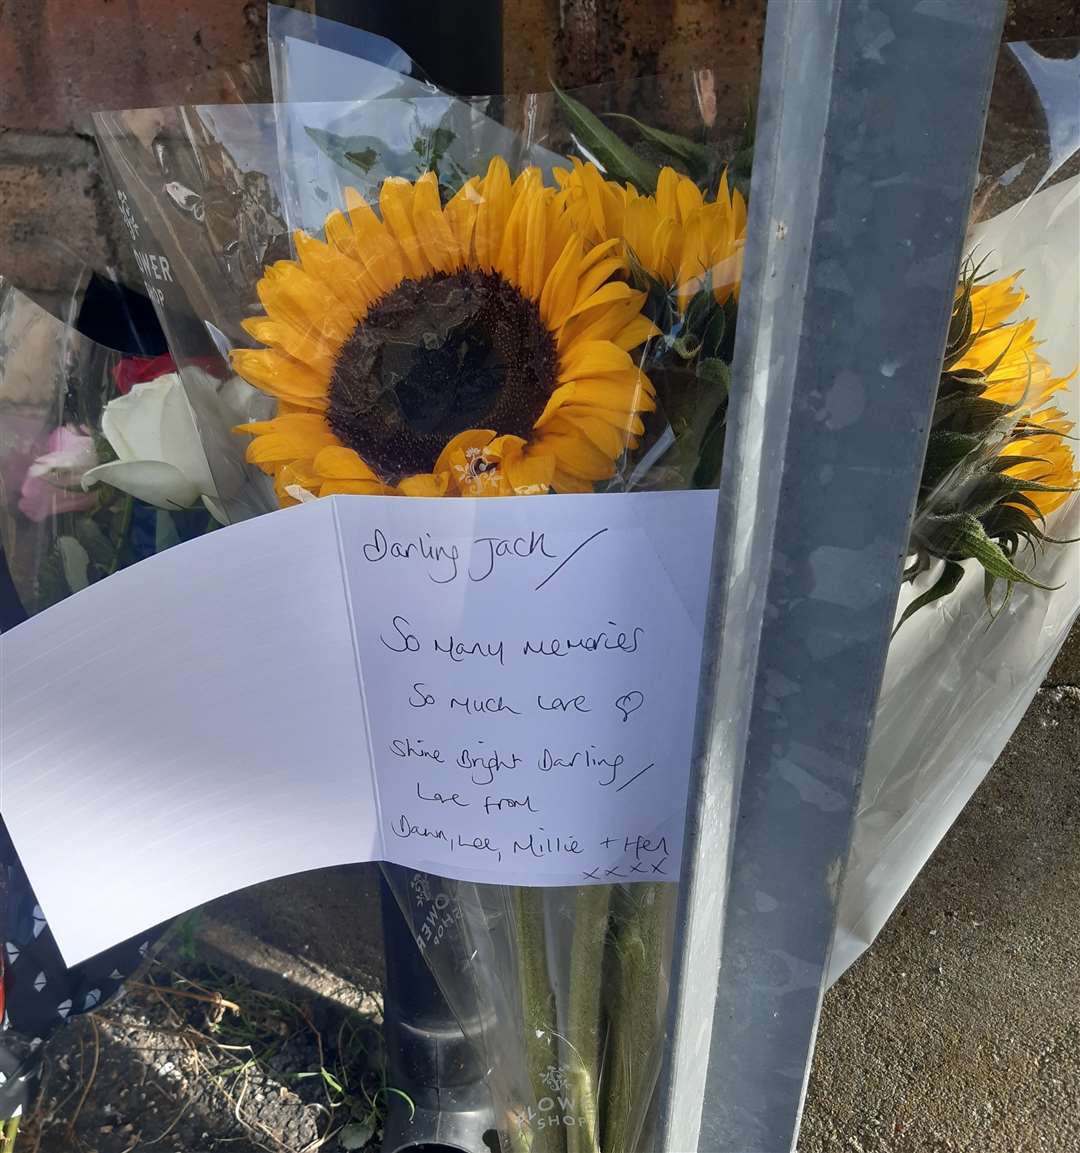 Tributes were laid near the place where Mr Bruce died after colliding with a bin lorry